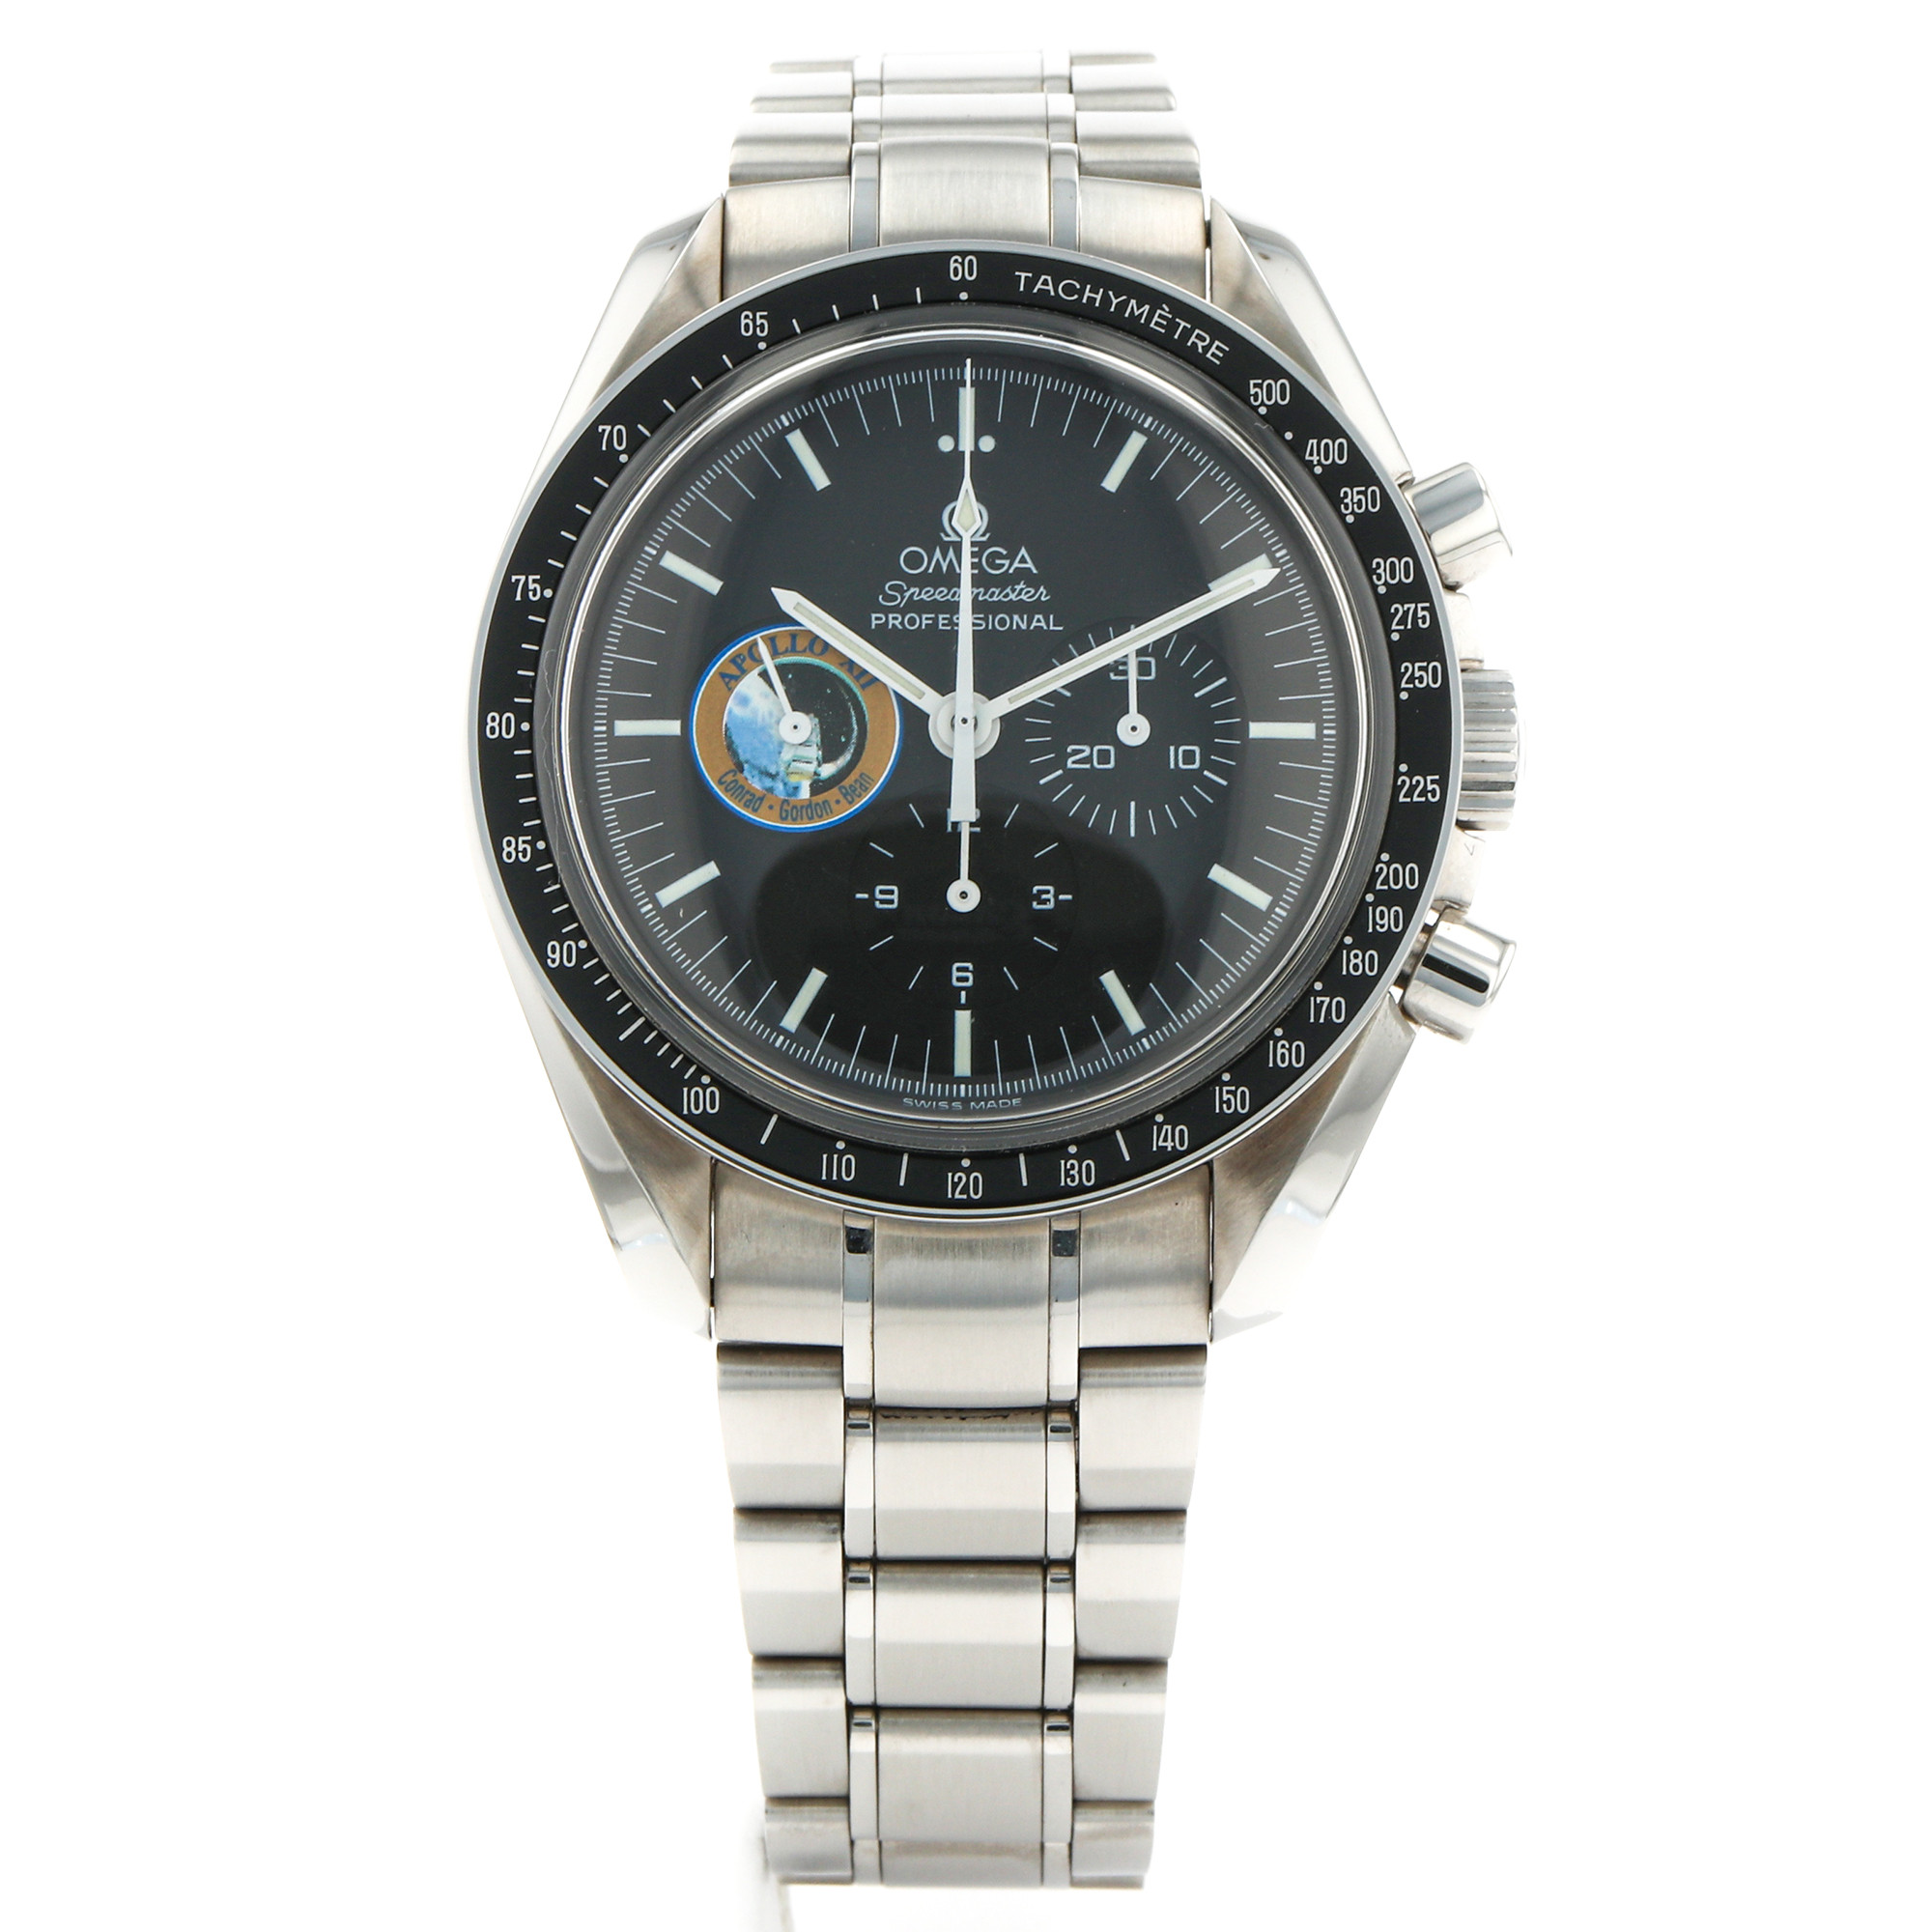 Omega Speedmaster Apollo XII Missions *Limited Edition*